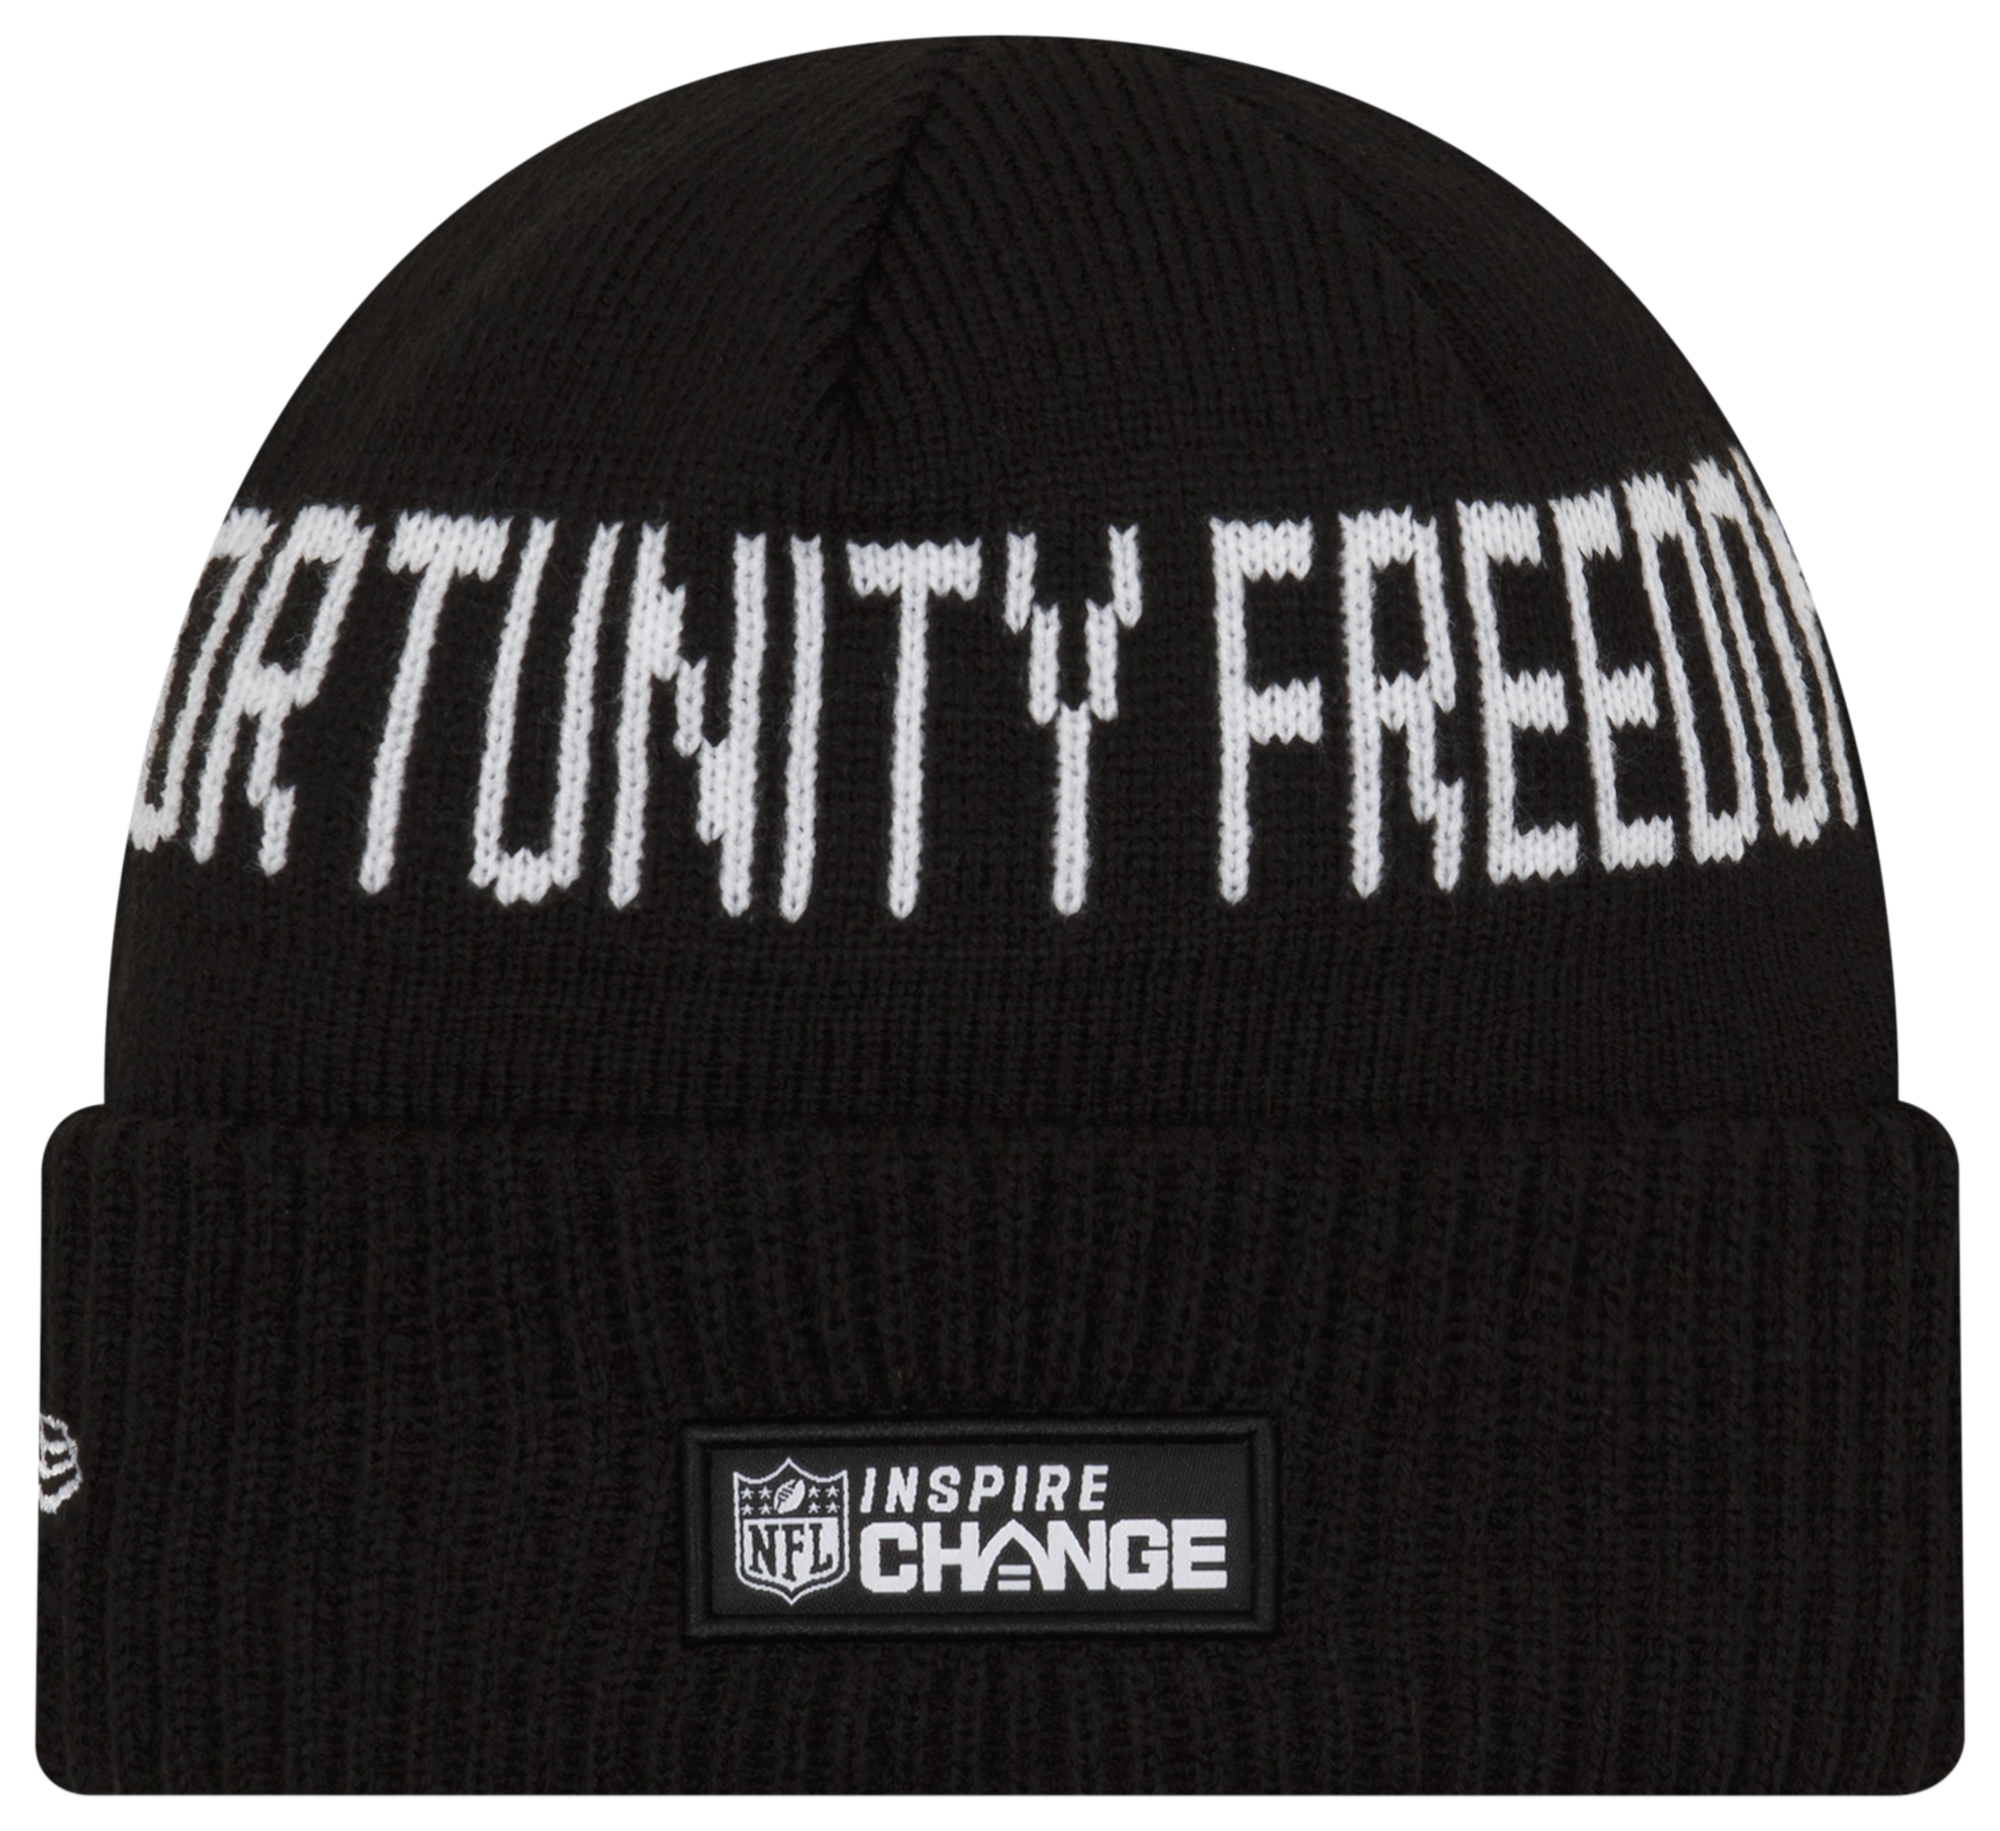 New Era Panthers Social Justice Knit Beanie